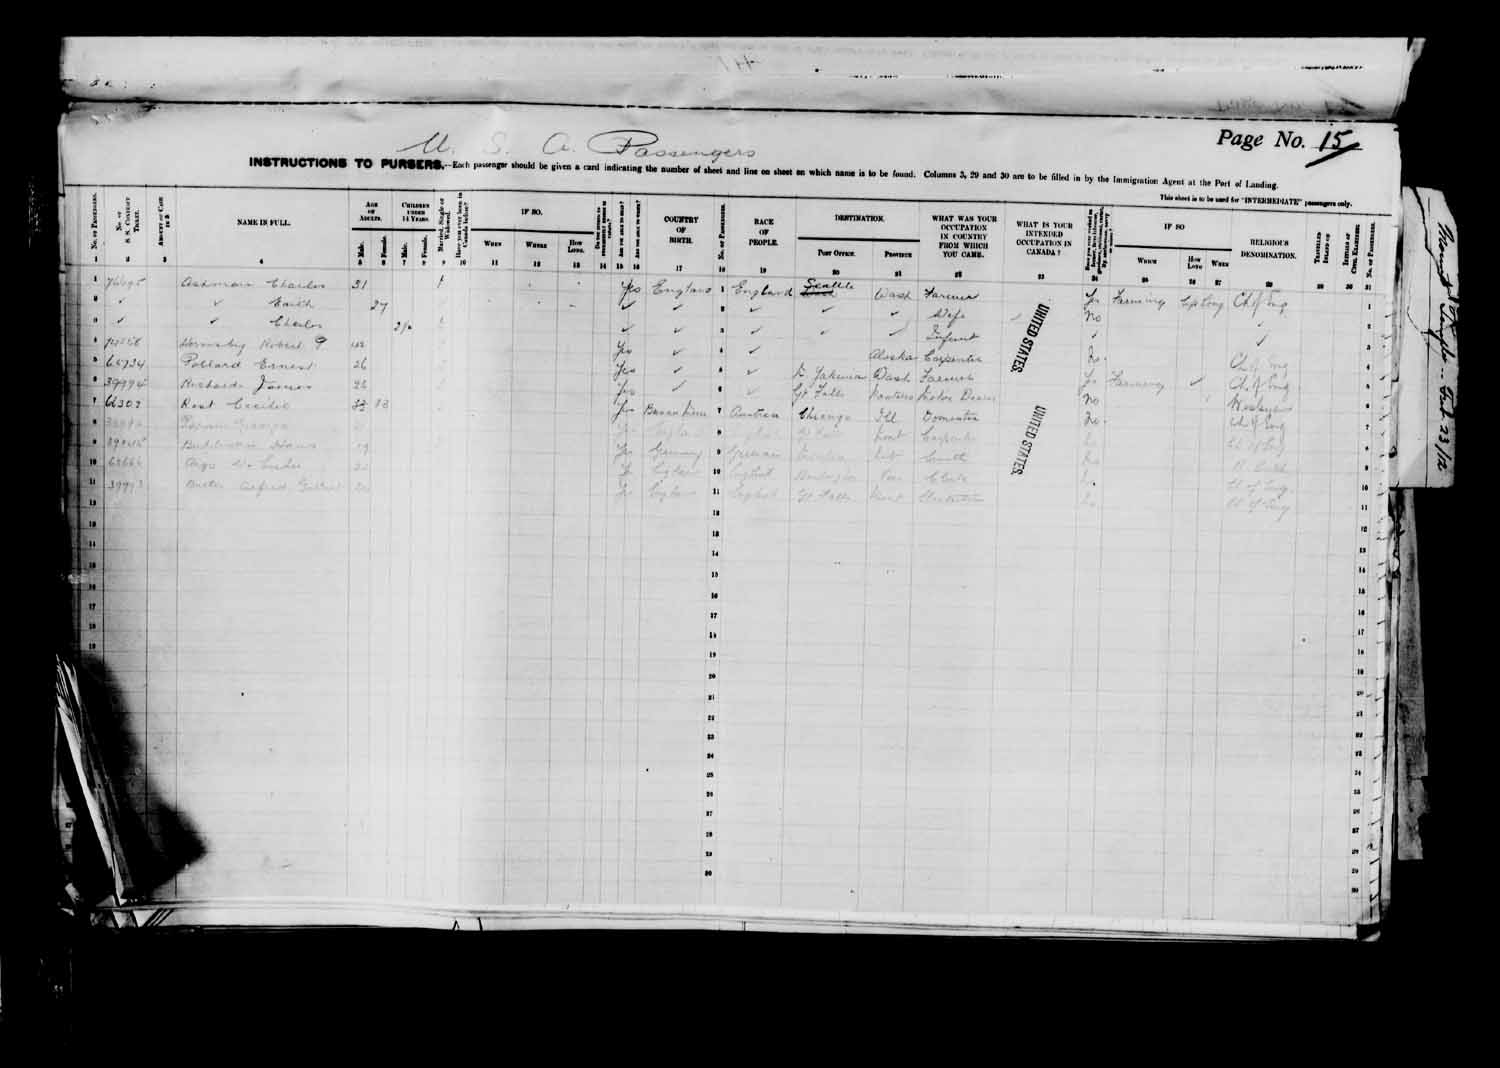 Digitized page of Passenger Lists for Image No.: e003627188